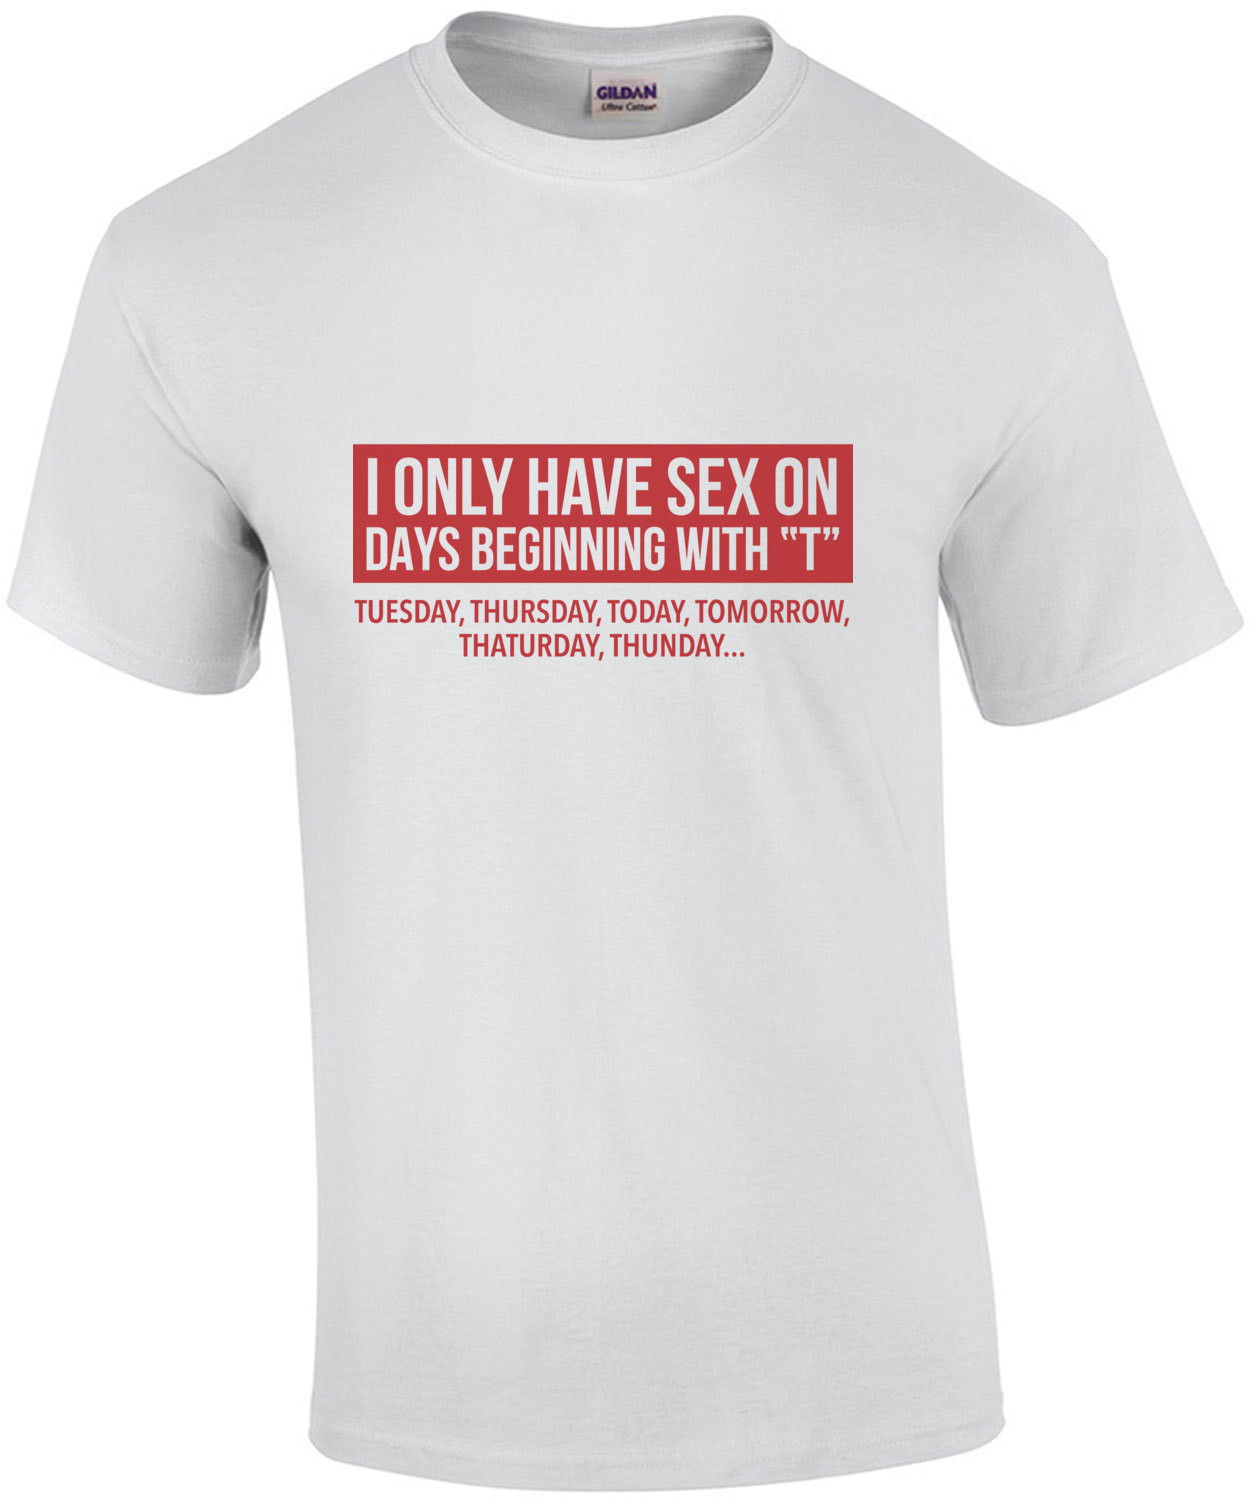 I only have sex on days begining T - Funny T-Shirt